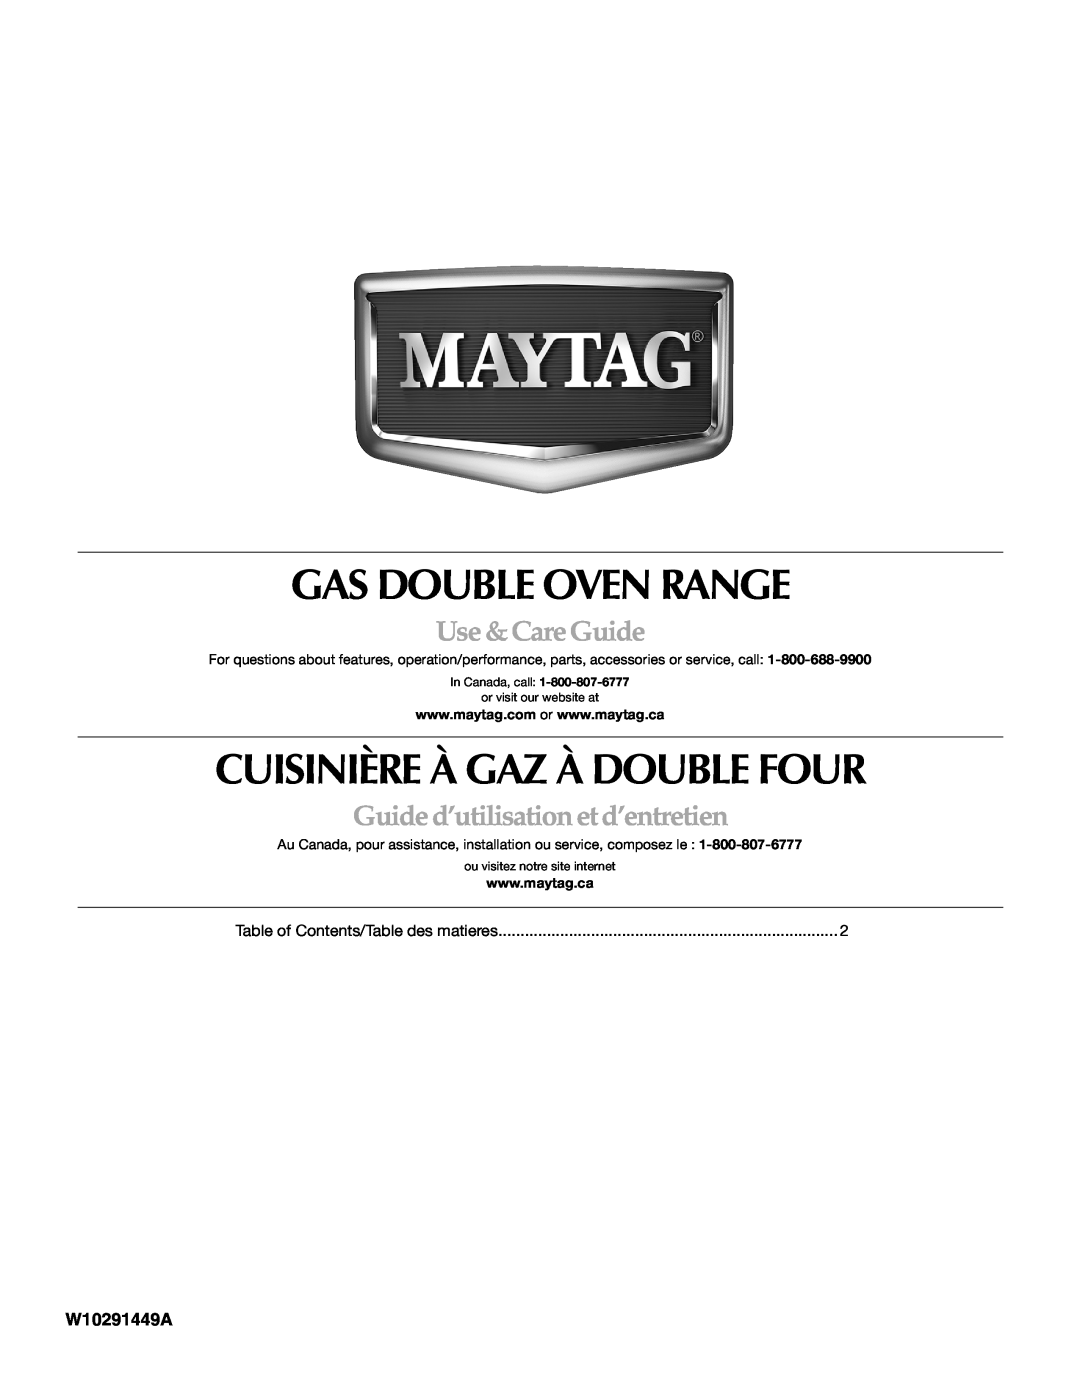 Maytag MGT8885XS manual Use & Care Guide, Guide d’utilisation et d’entretien, Gas Double Oven Range, W10291449A 